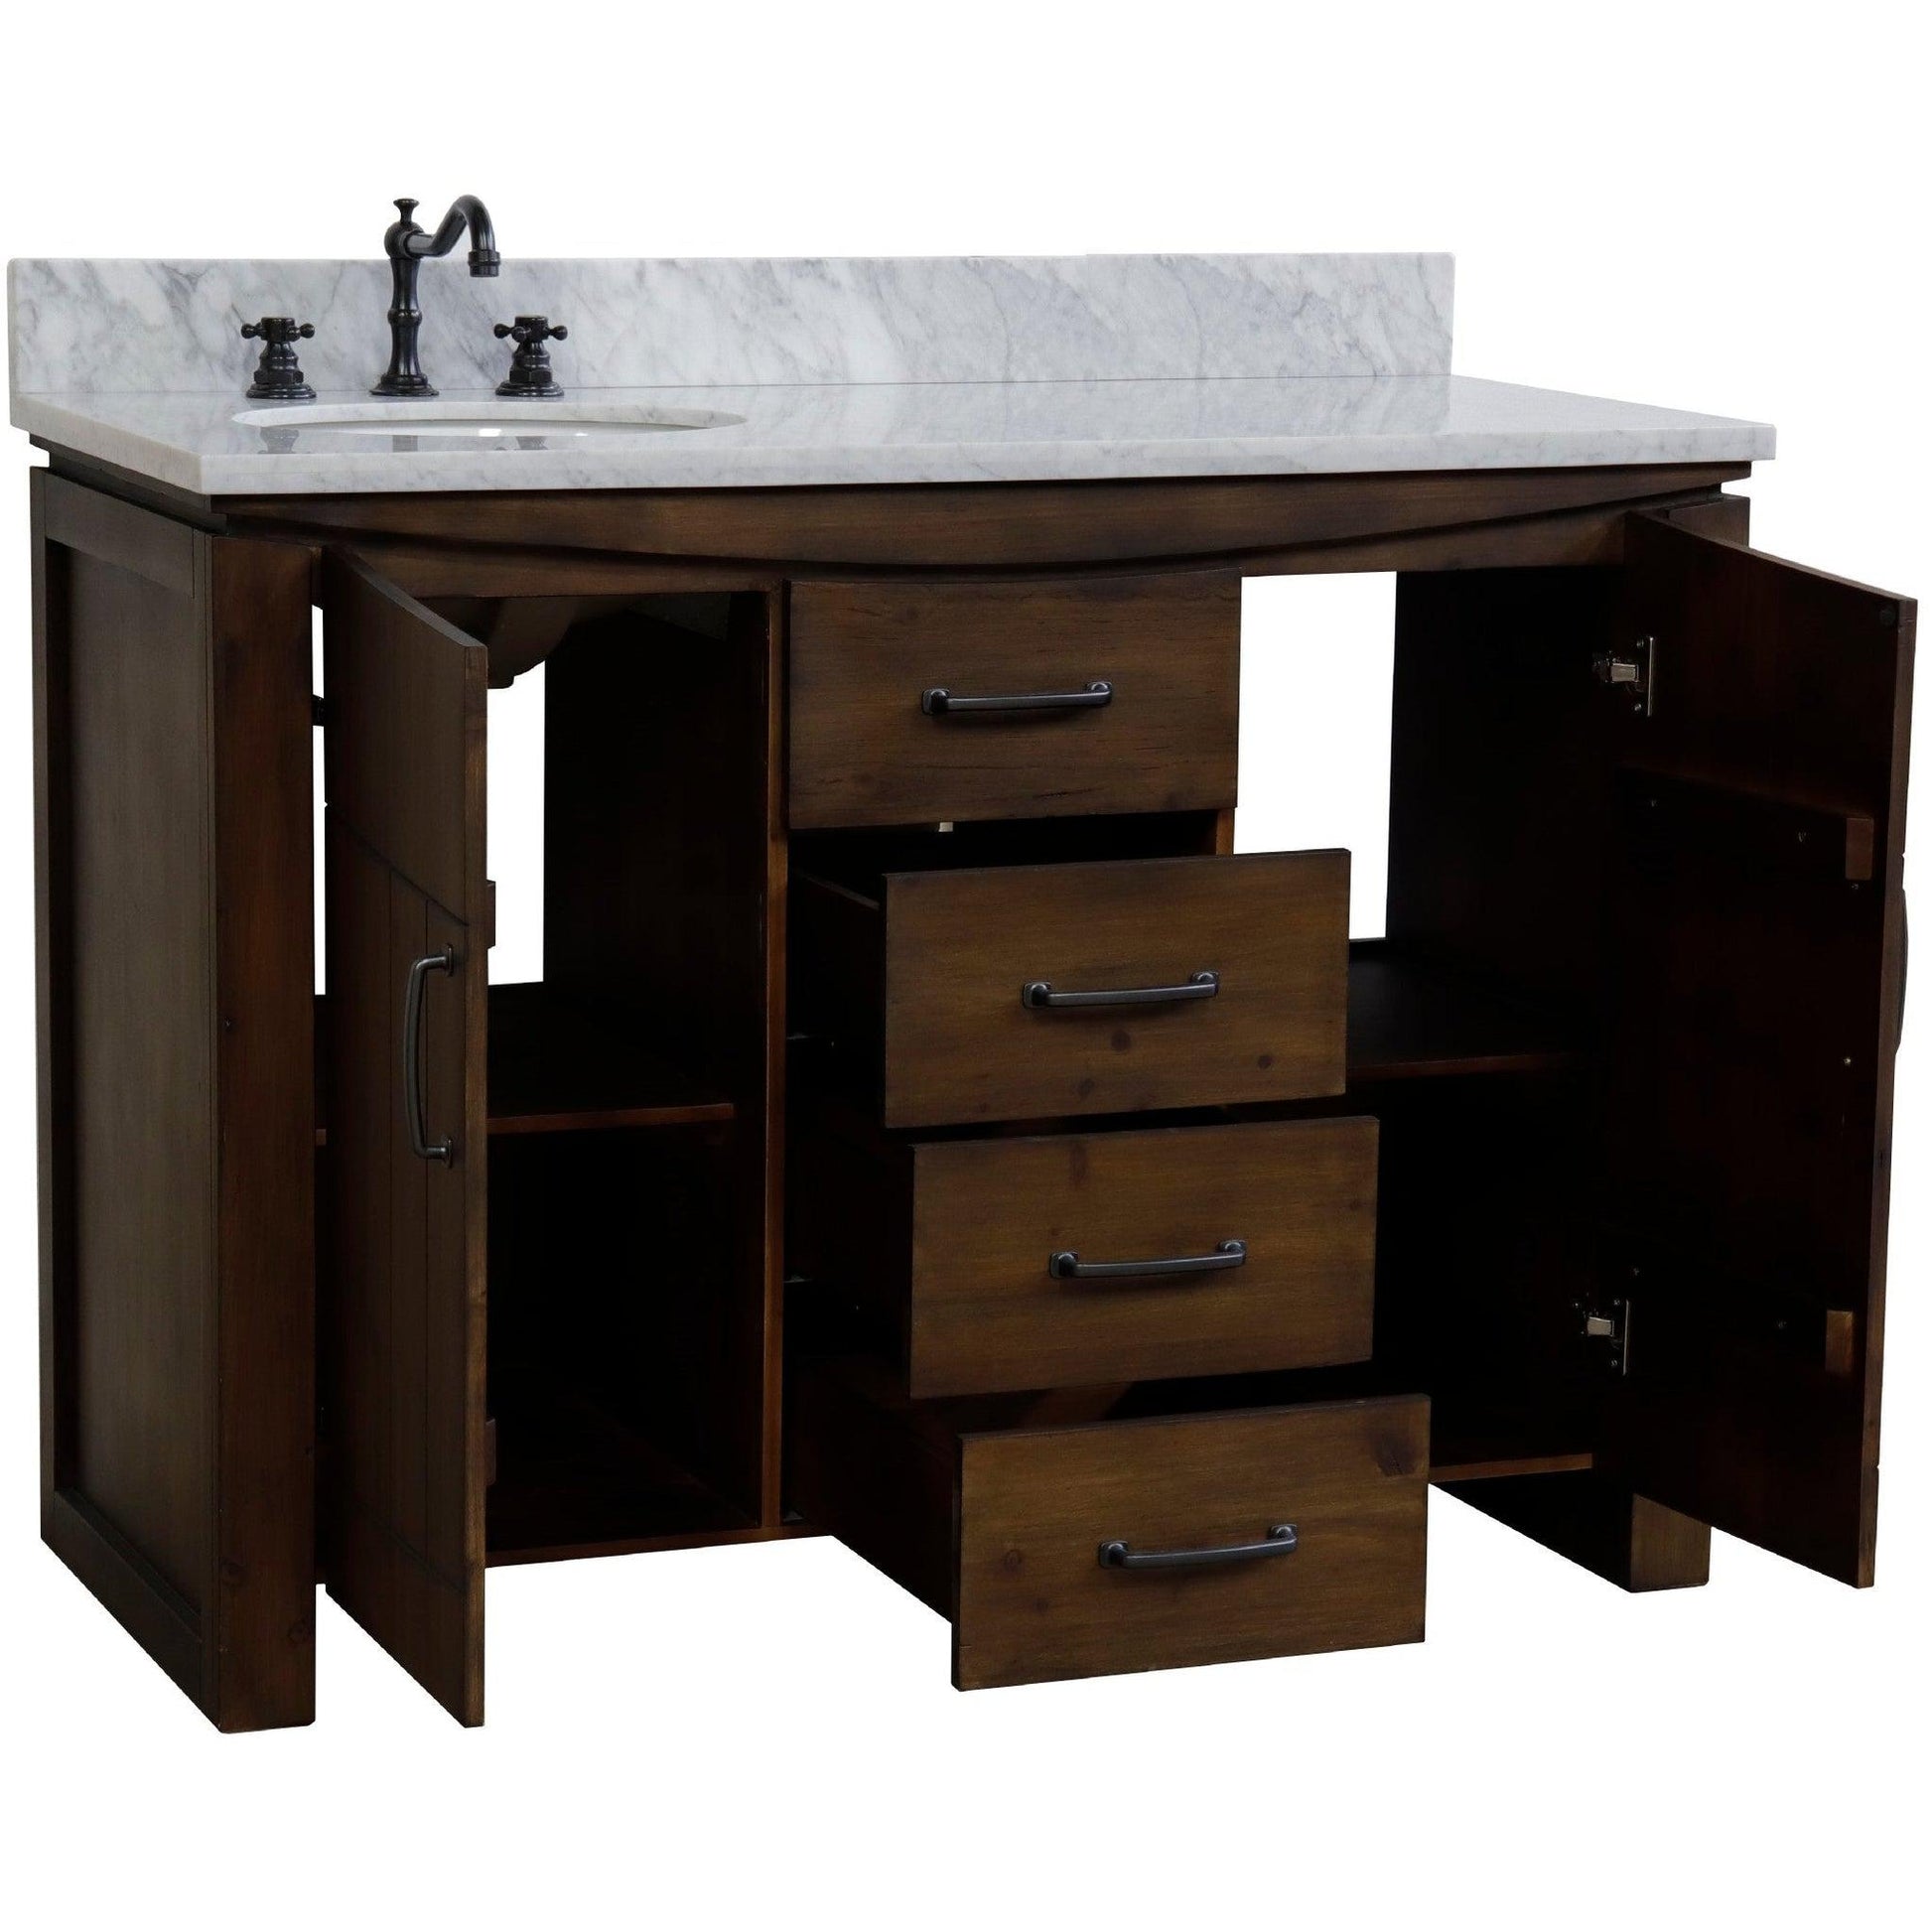 Bellaterra Home 48" 2-Door 3-Drawer Rustic Wood Freestanding Vanity Set With Ceramic Left Offset Undermount Oval Sink and White Marble Top